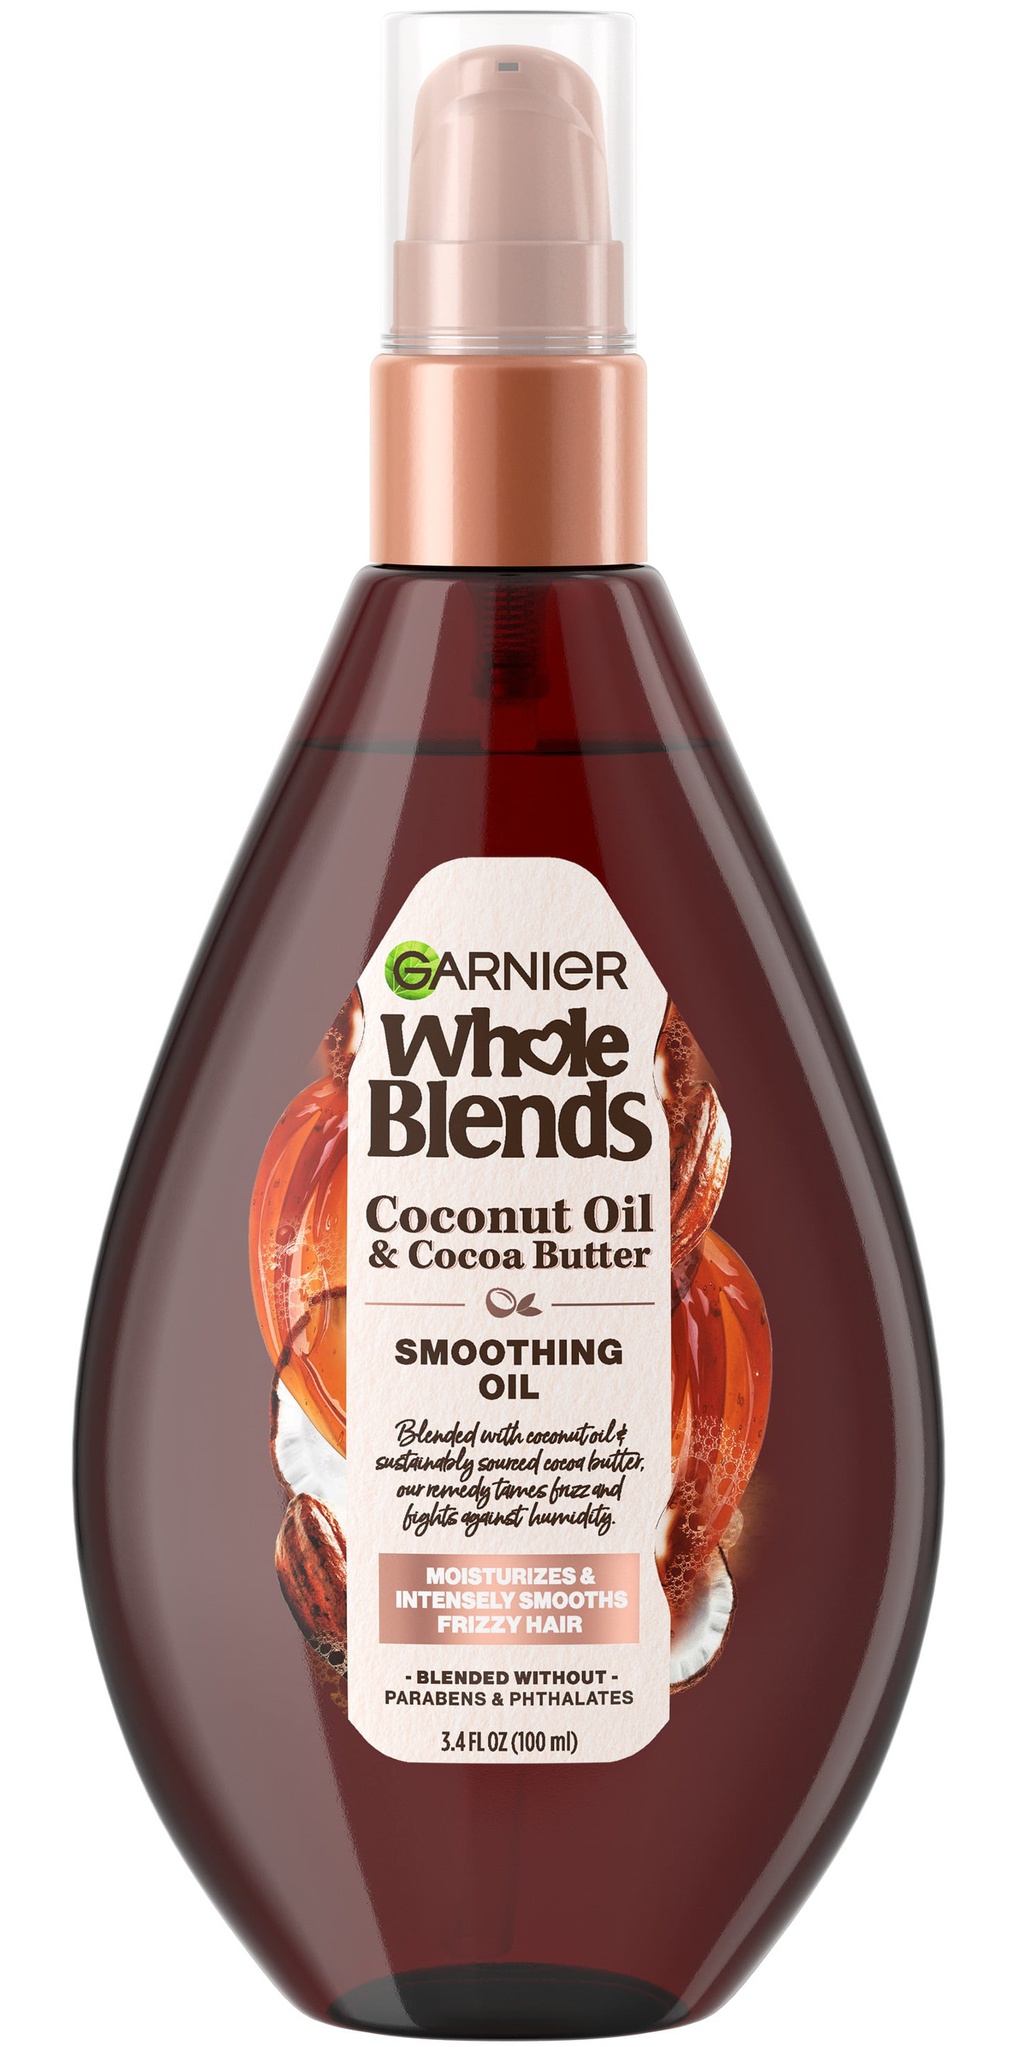 Garnier Whole Blends Smoothing Oil With Coconut Oil & Cocoa Butter Extracts